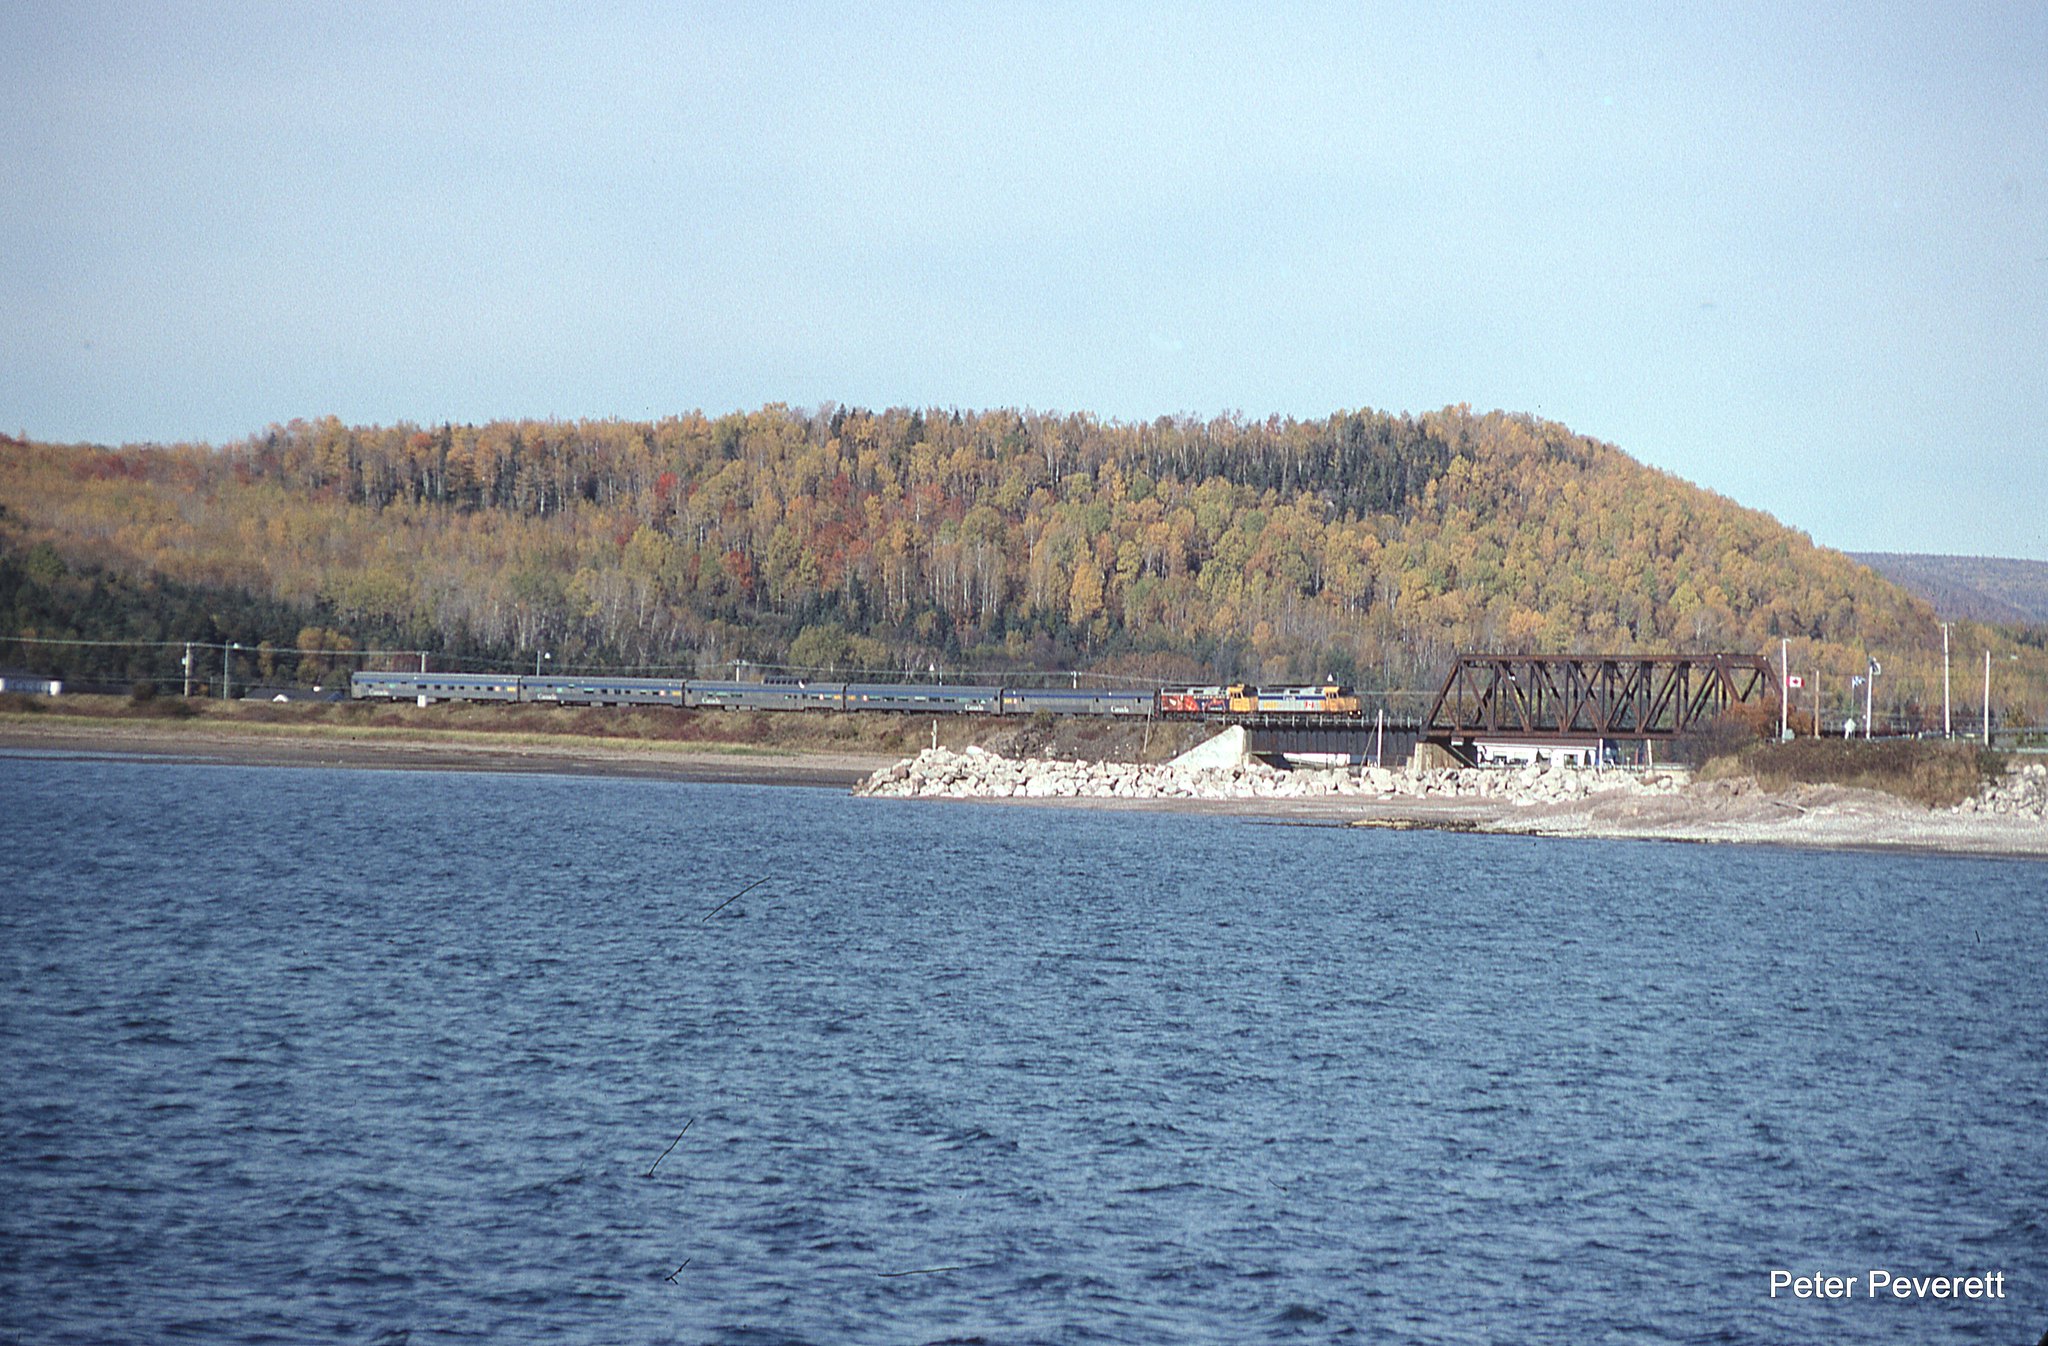 VIA Chaleur F40PH-2 # 6402, 6408 are eastbound at Port Daniel, Quebec Oct. 7, 2006.  They have just pulled away from a quick station stop and will shortly enter the short tunnel on the east side of town and continue on to Gaspe.